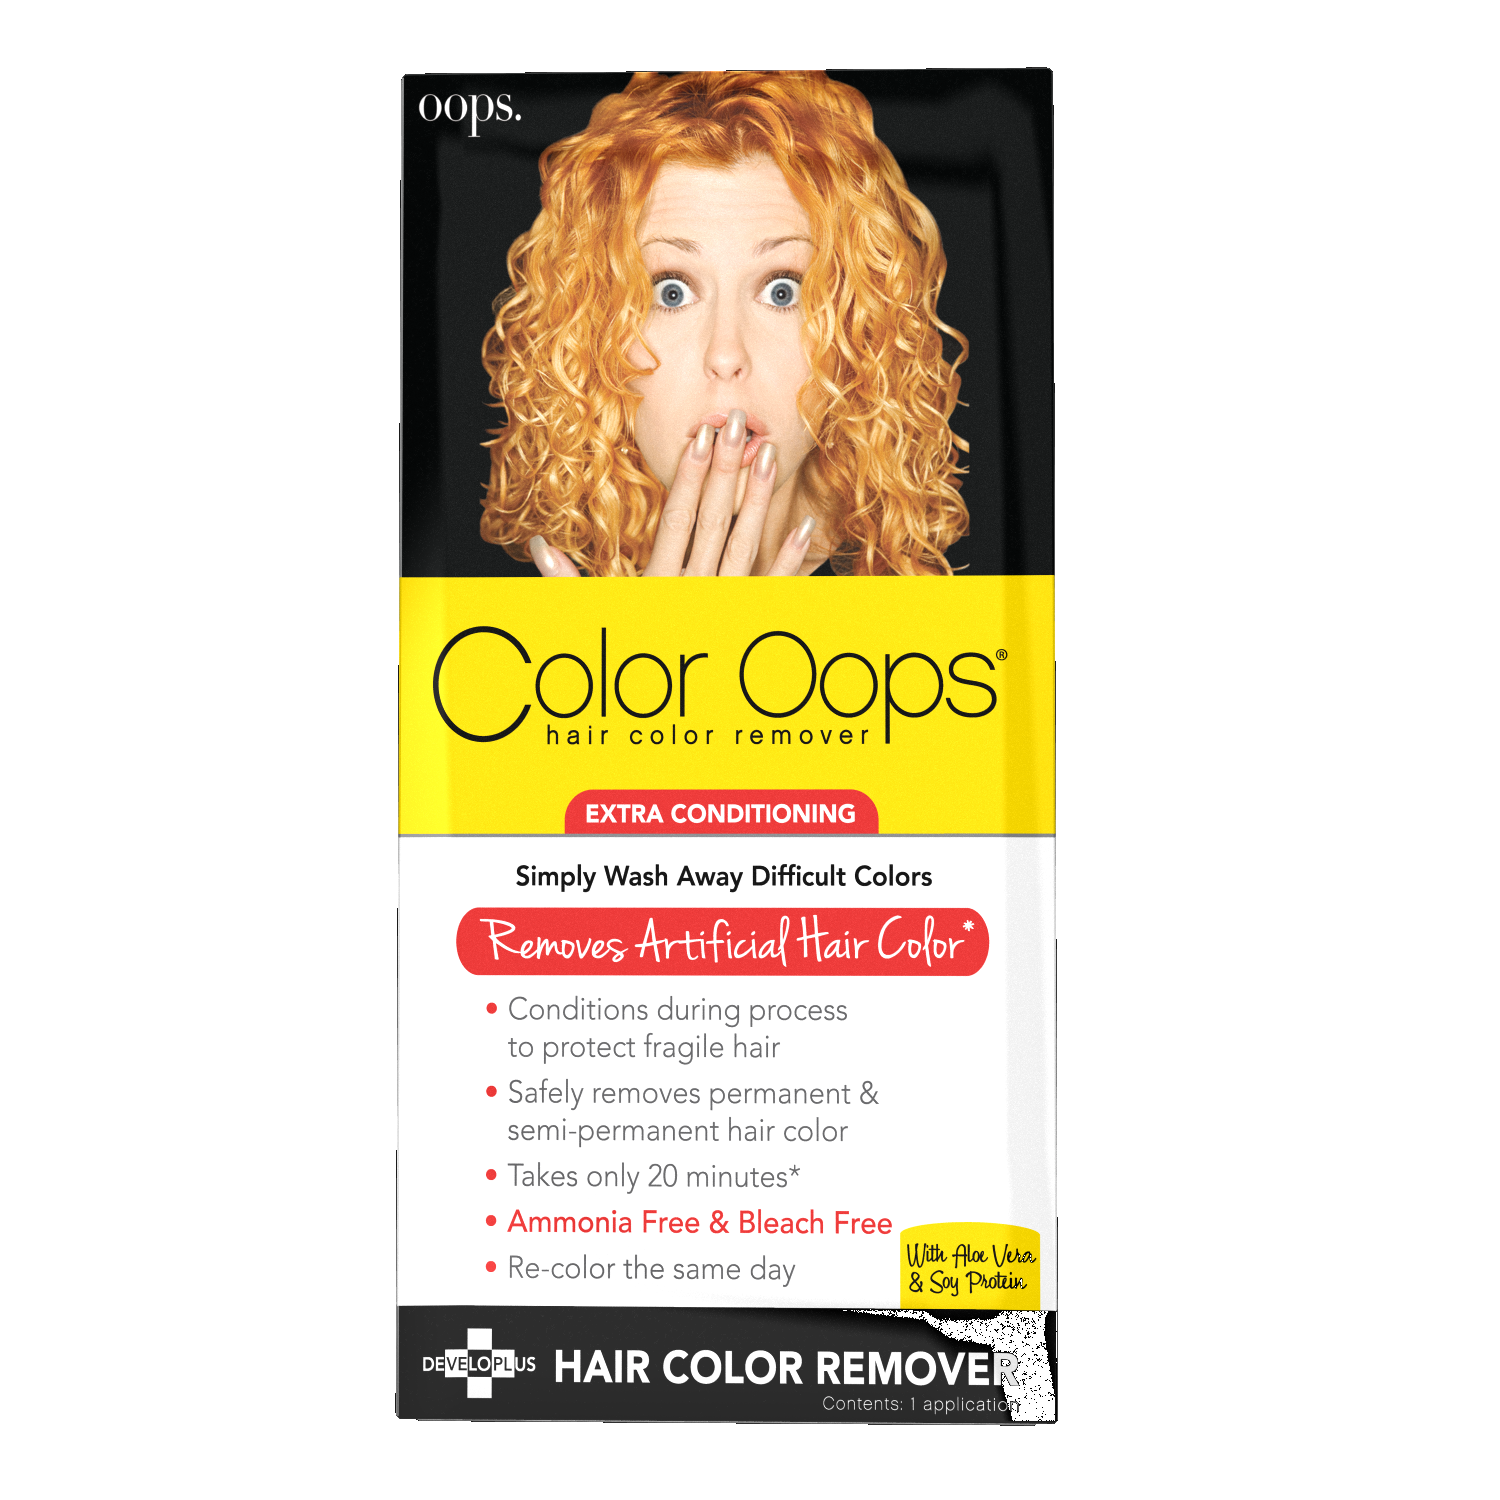 Color Oops Hair Color Remover Extra Strength 191 ml - CTC Health